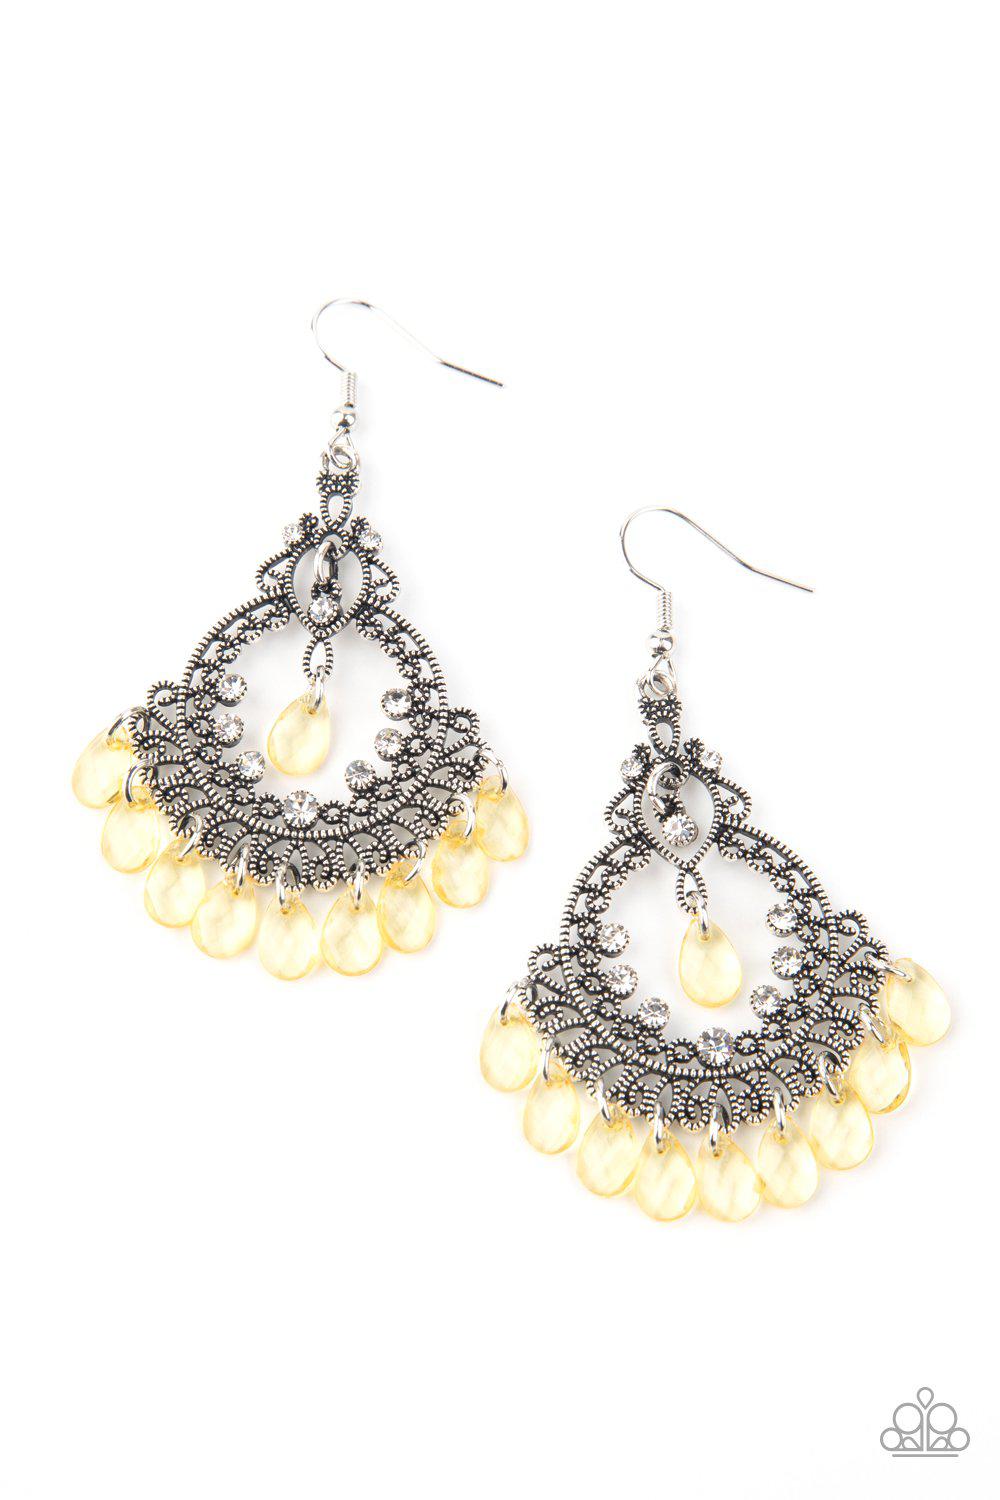 Lyrical Luster Yellow Chandelier Earrings - Paparazzi Accessories - lightbox -CarasShop.com - $5 Jewelry by Cara Jewels